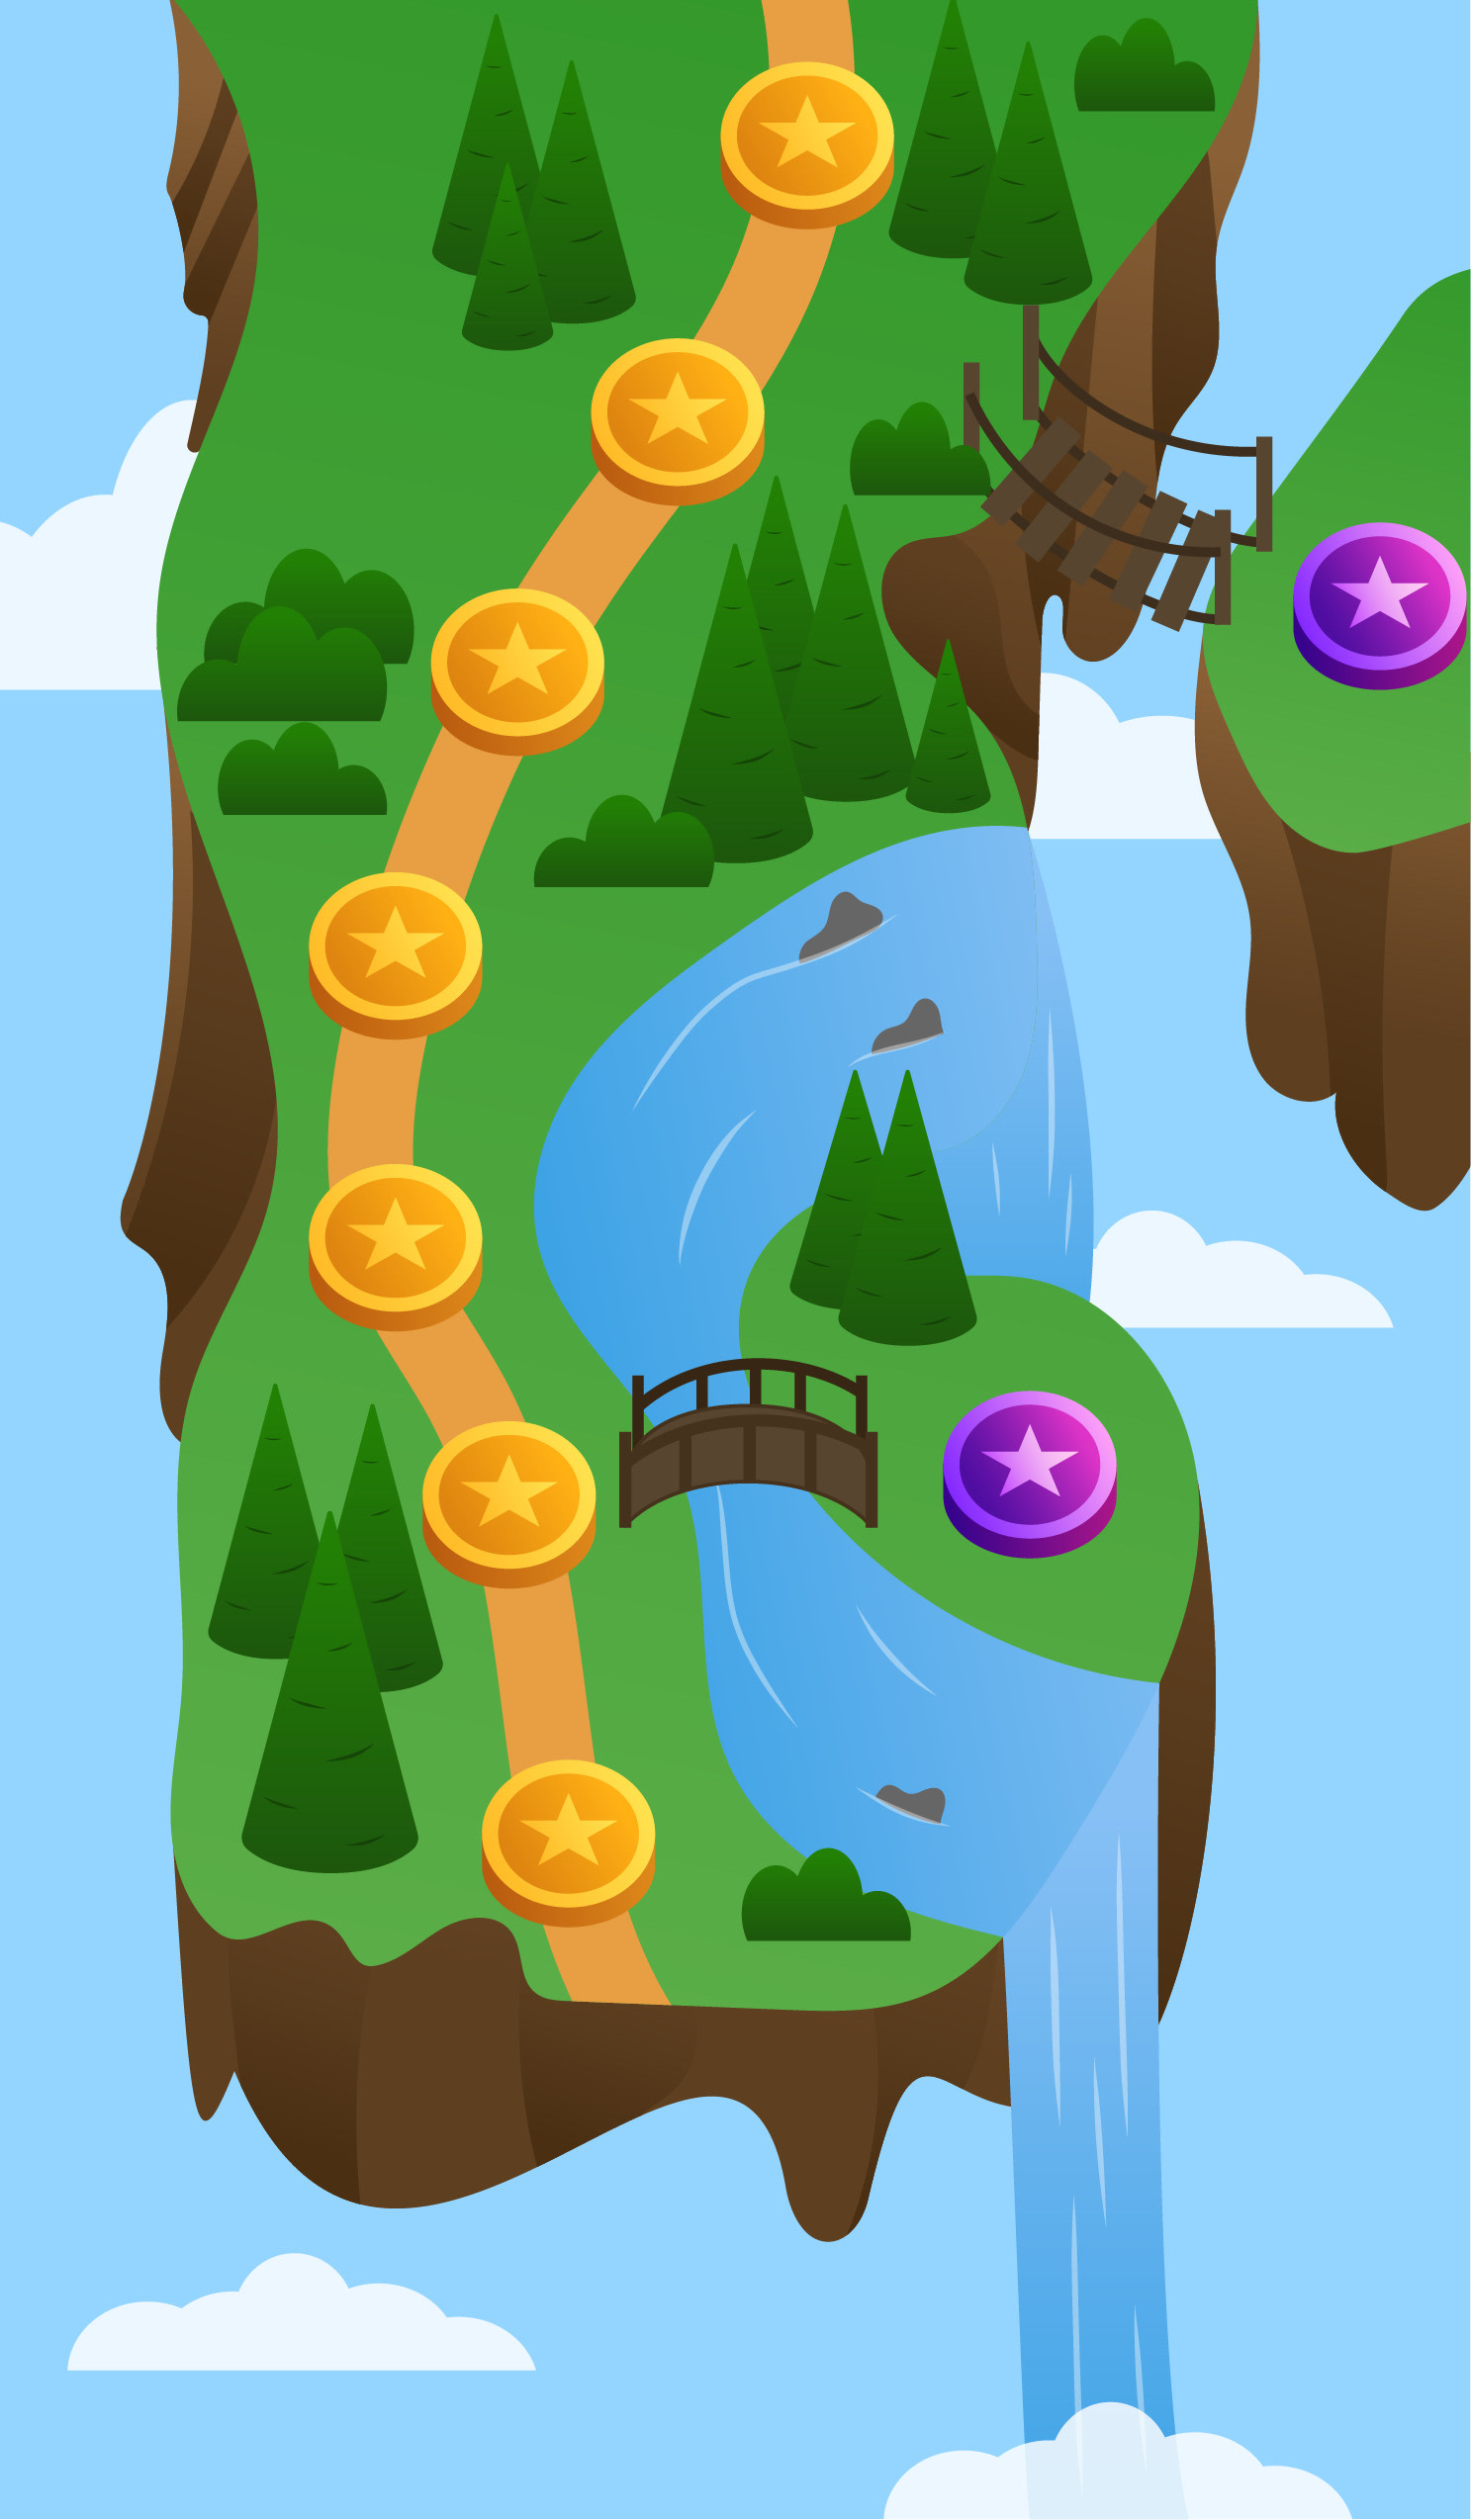 Level World Map For Mobile Games - Assets - For Game Reskin Royalty Free  SVG, Cliparts, Vectors, and Stock Illustration. Image 107220775.